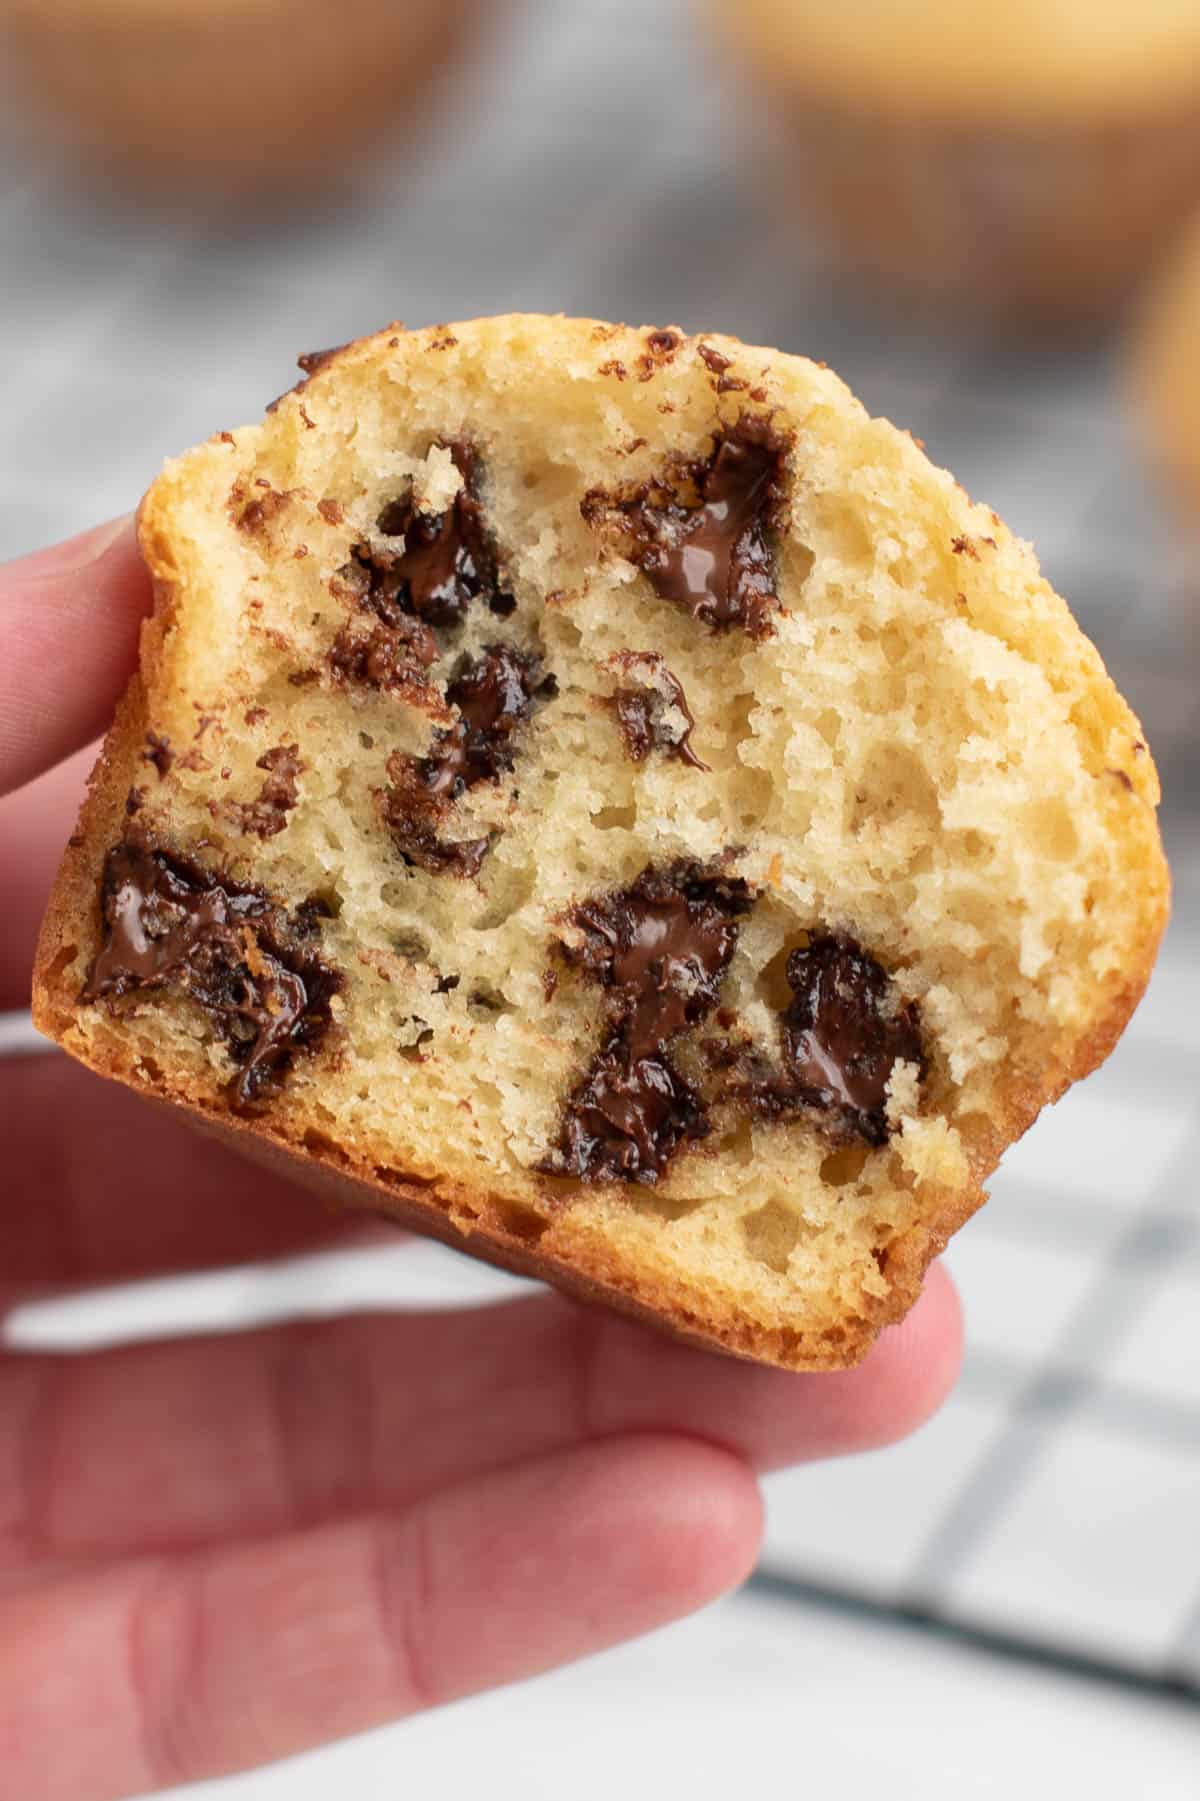 holding a chocolate chip muffin